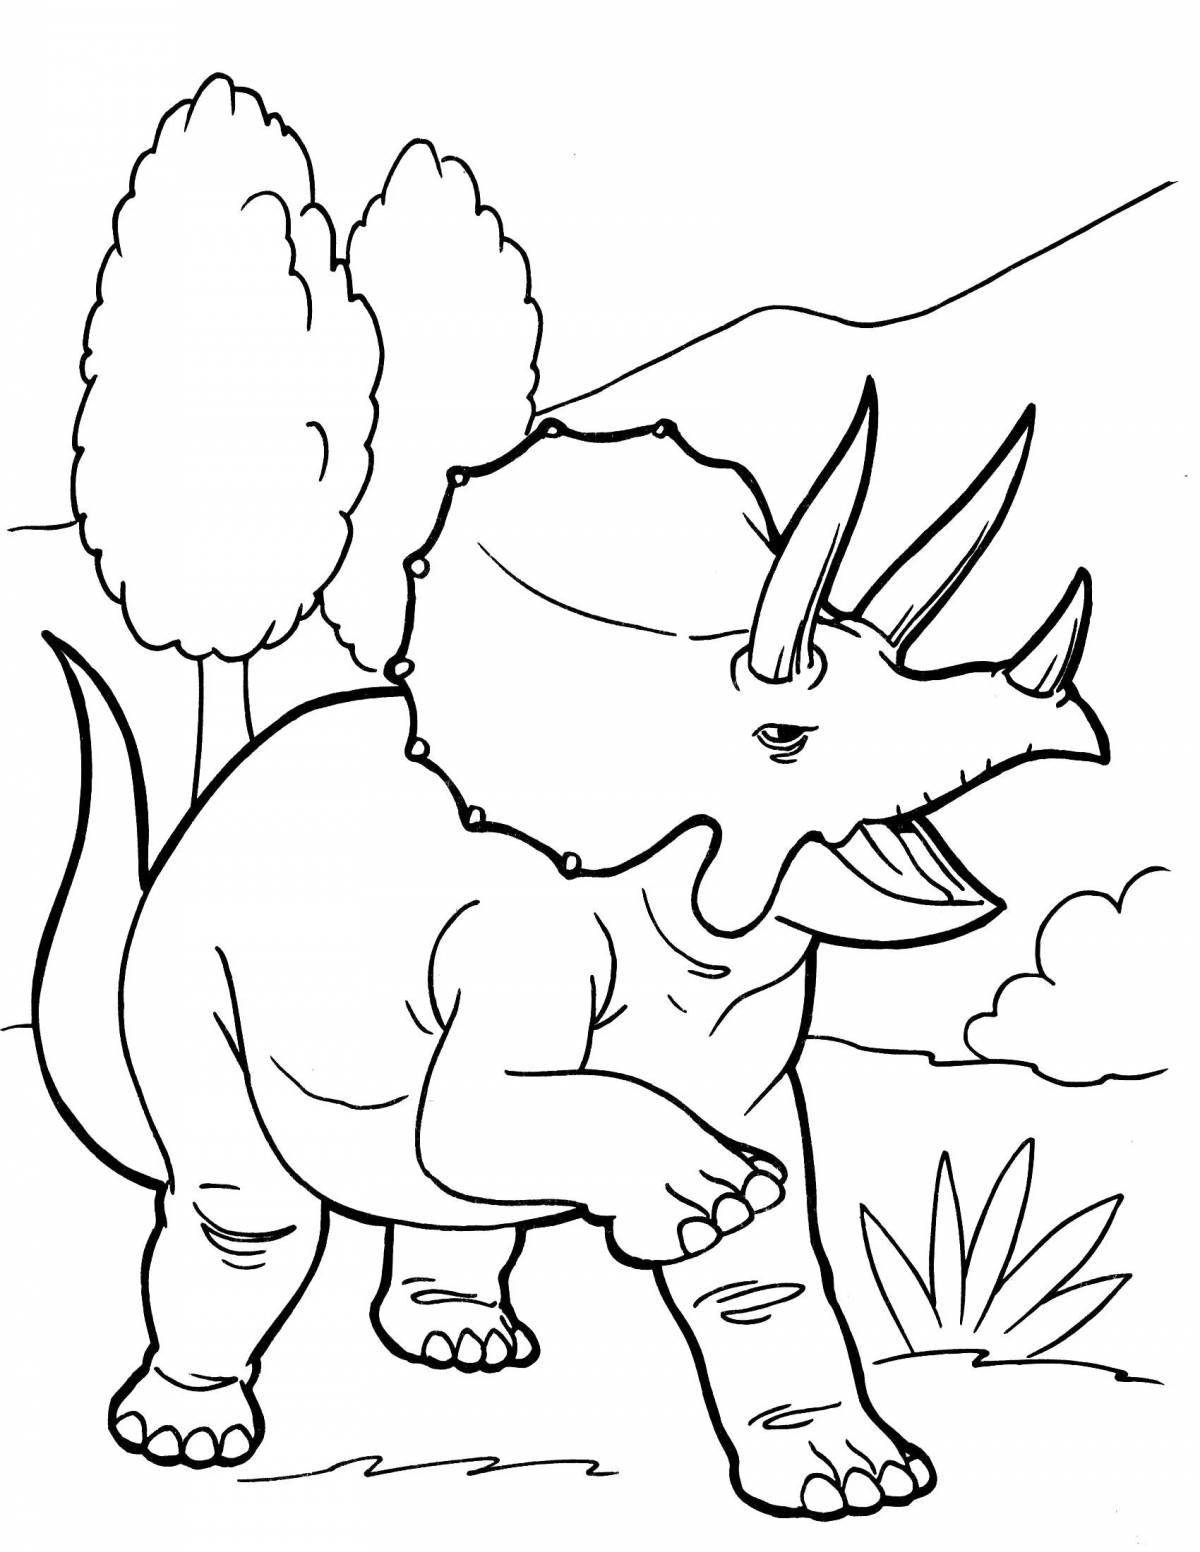 Cute triceratops coloring book